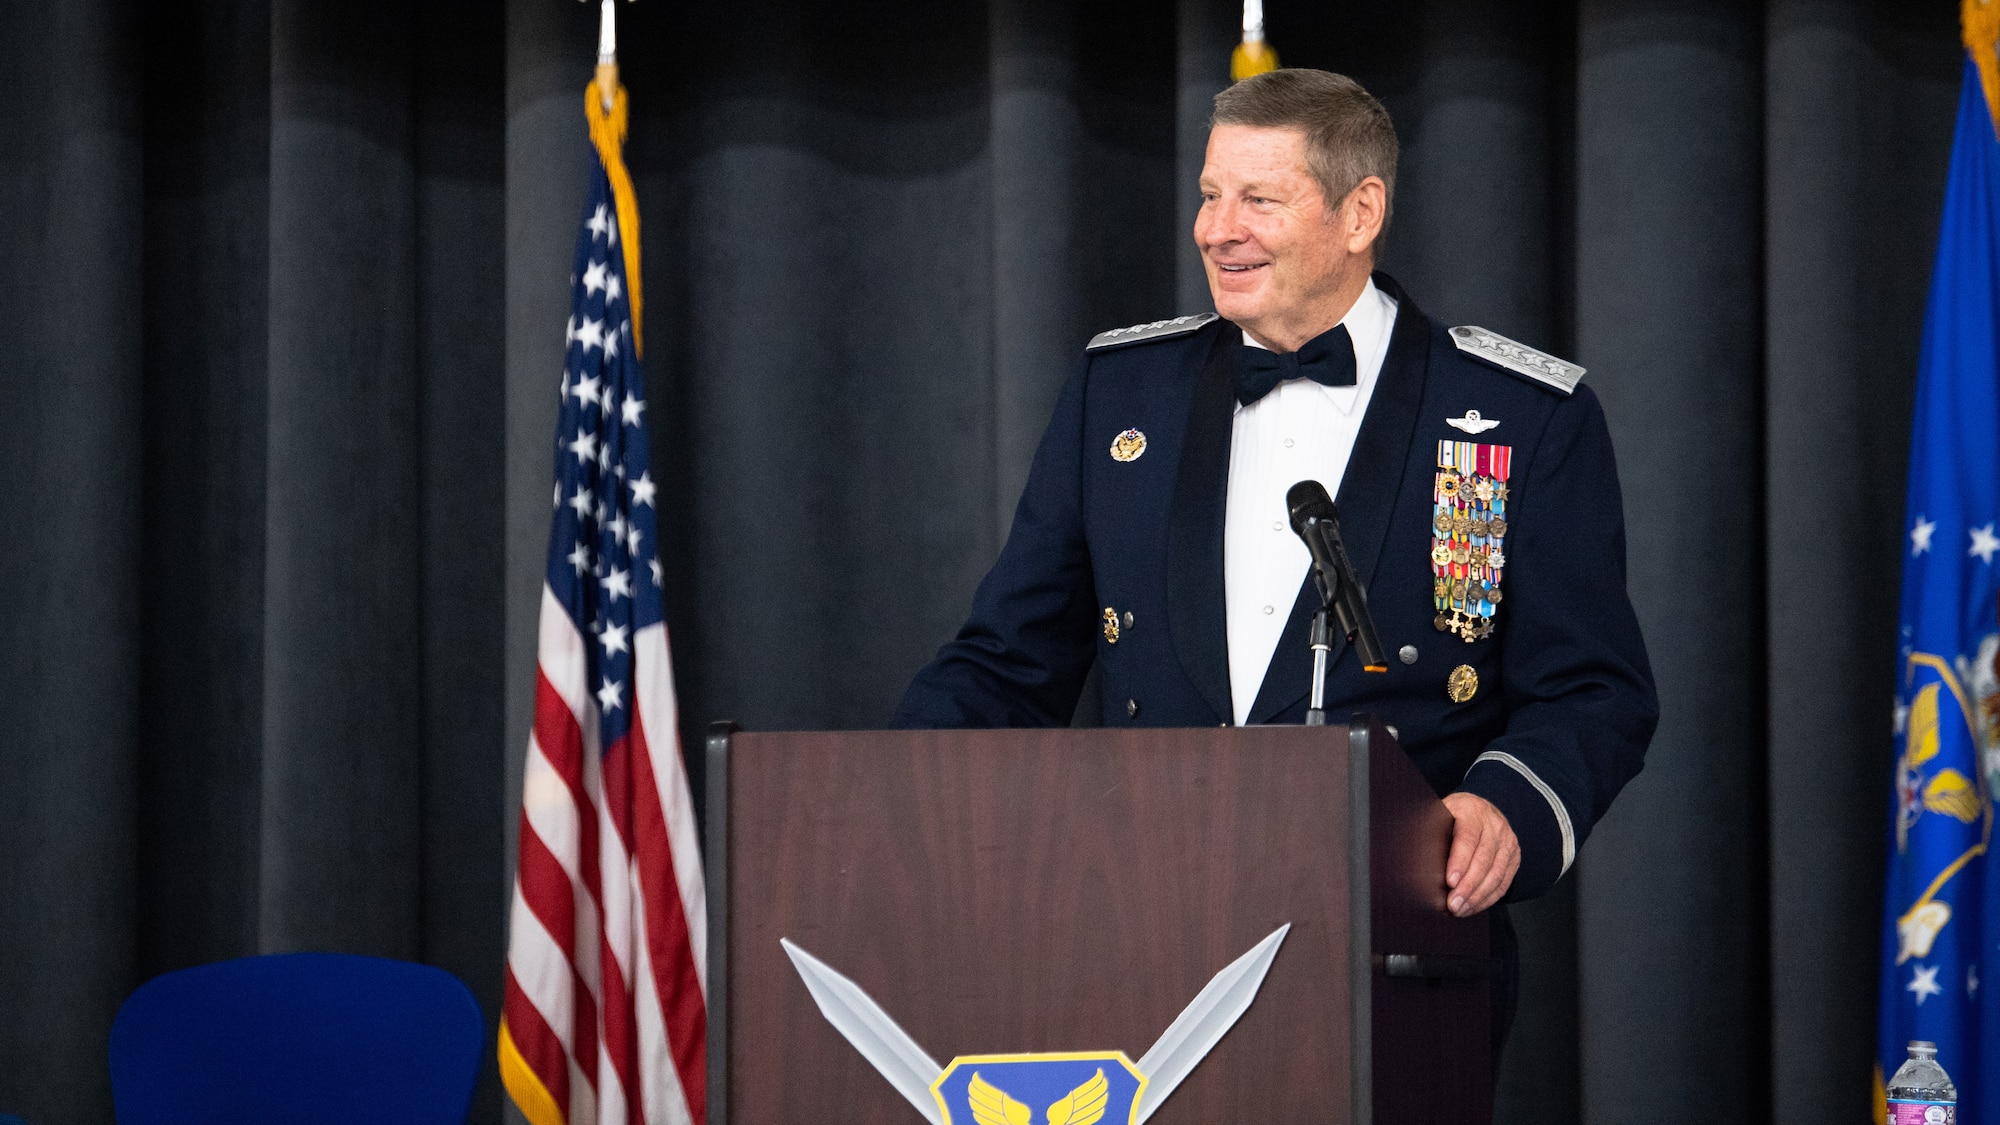 Retired Gen. Robin Rand, former Air Force Global Strike Command commander, makes remarks after being honored at an Order of the Sword ceremony at Barksdale Air Force Base, Louisiana, April 23, 2021. The Order of the Sword is a rare honor bestowed on a senior officer or civilian by the enlisted corps of a command. (U.S. Air Force photo by Airman 1st Class Jacob B. Wrightsman)